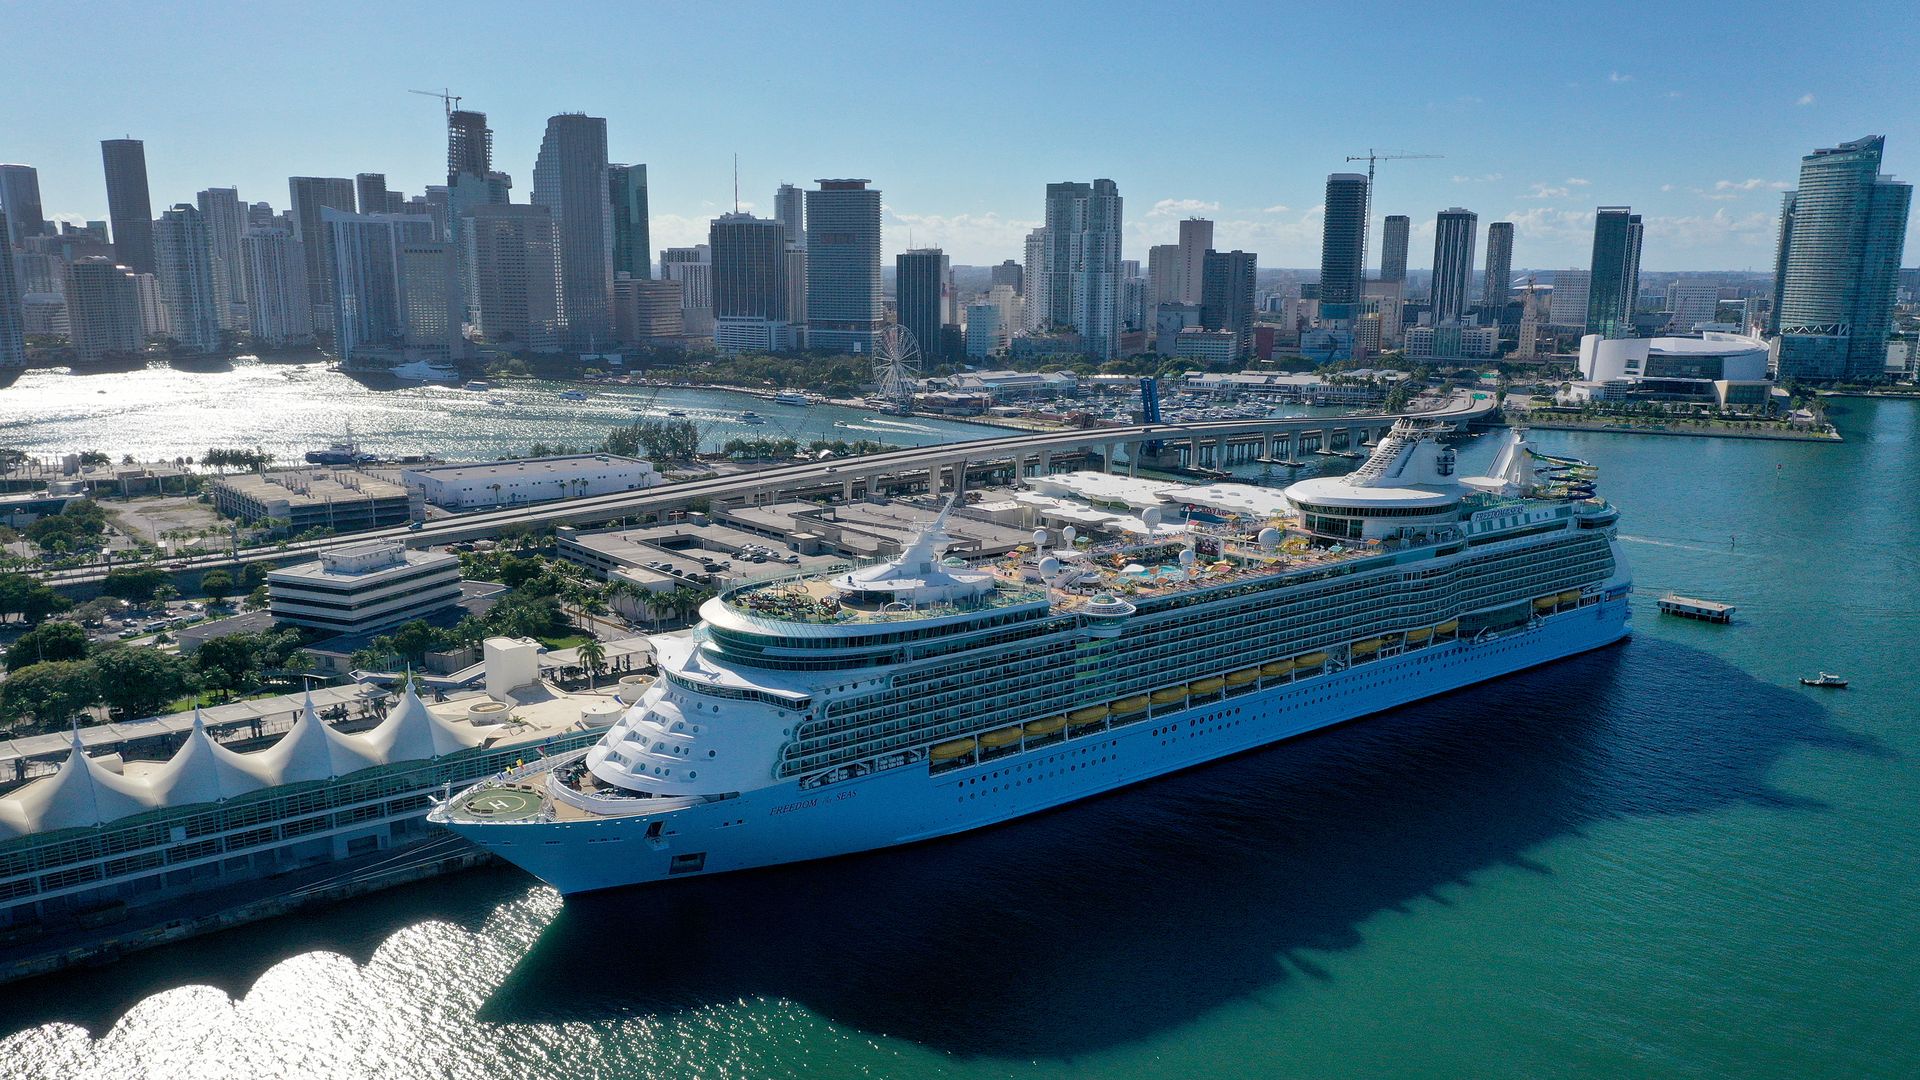 A cruise ship waits for people to embark before leaving PortMiami on December 31, 2021 in Miami, Florida. 